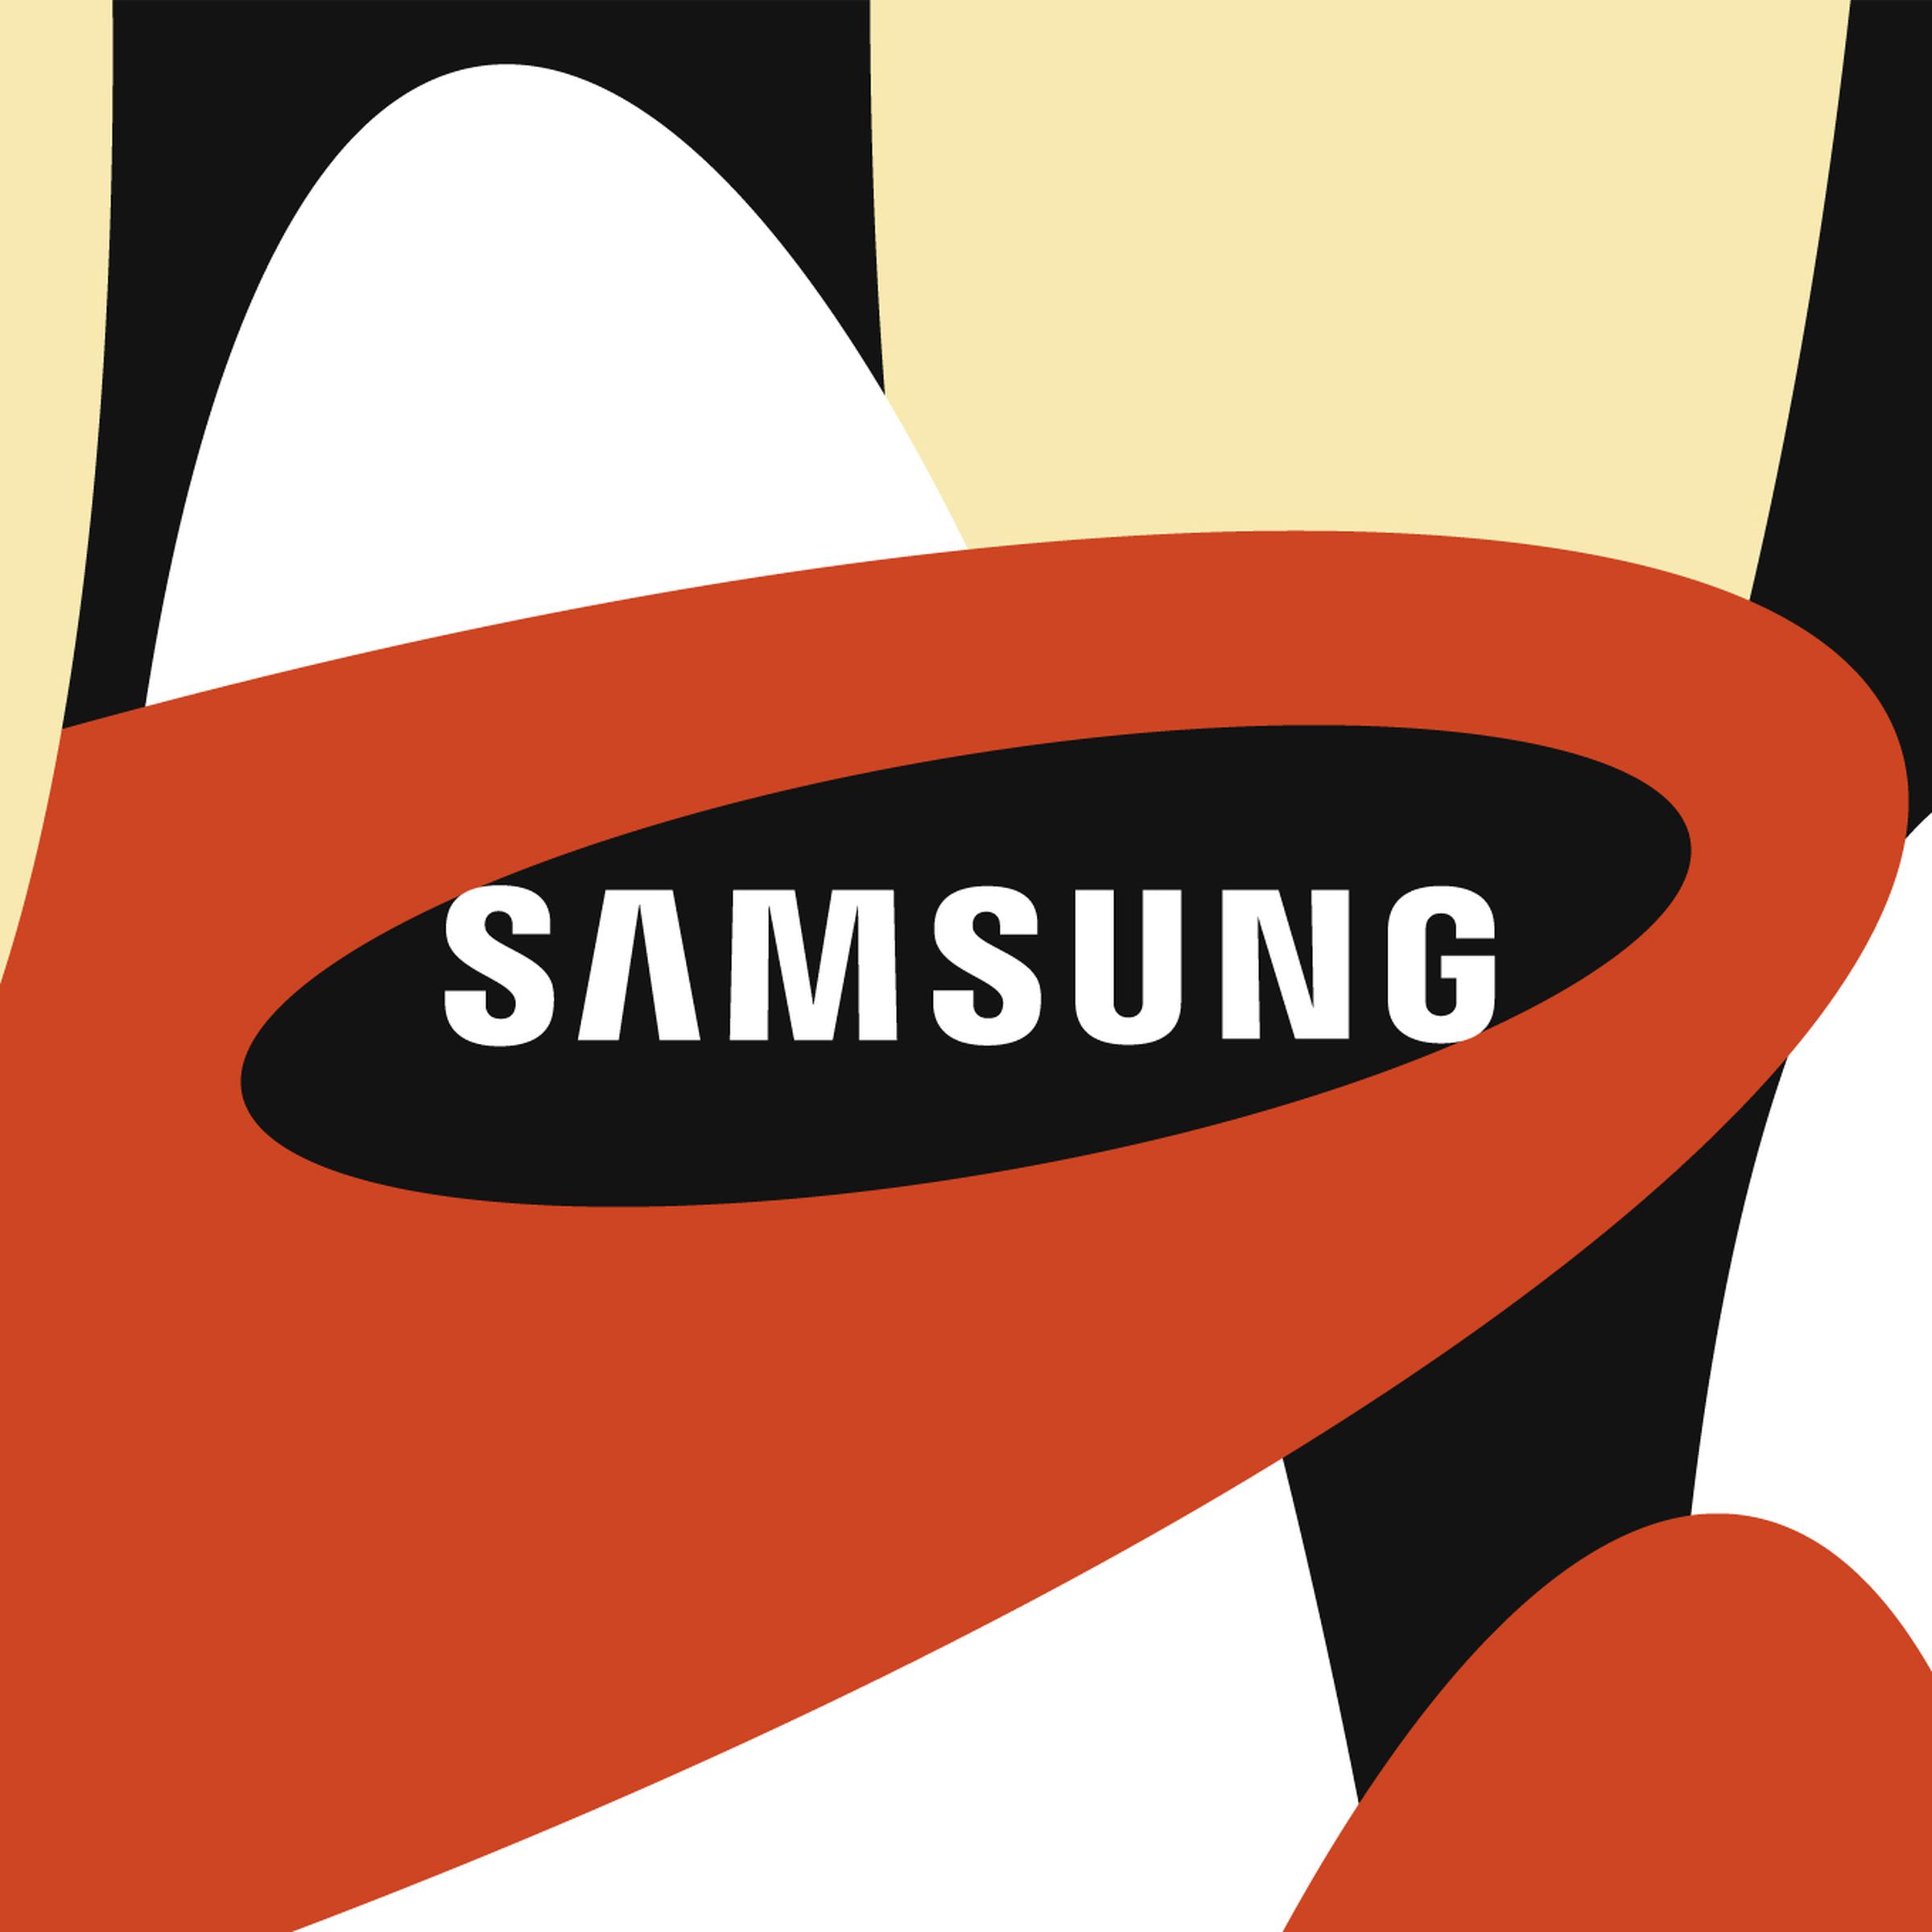 Samsung logo on red, white, black, and yello background